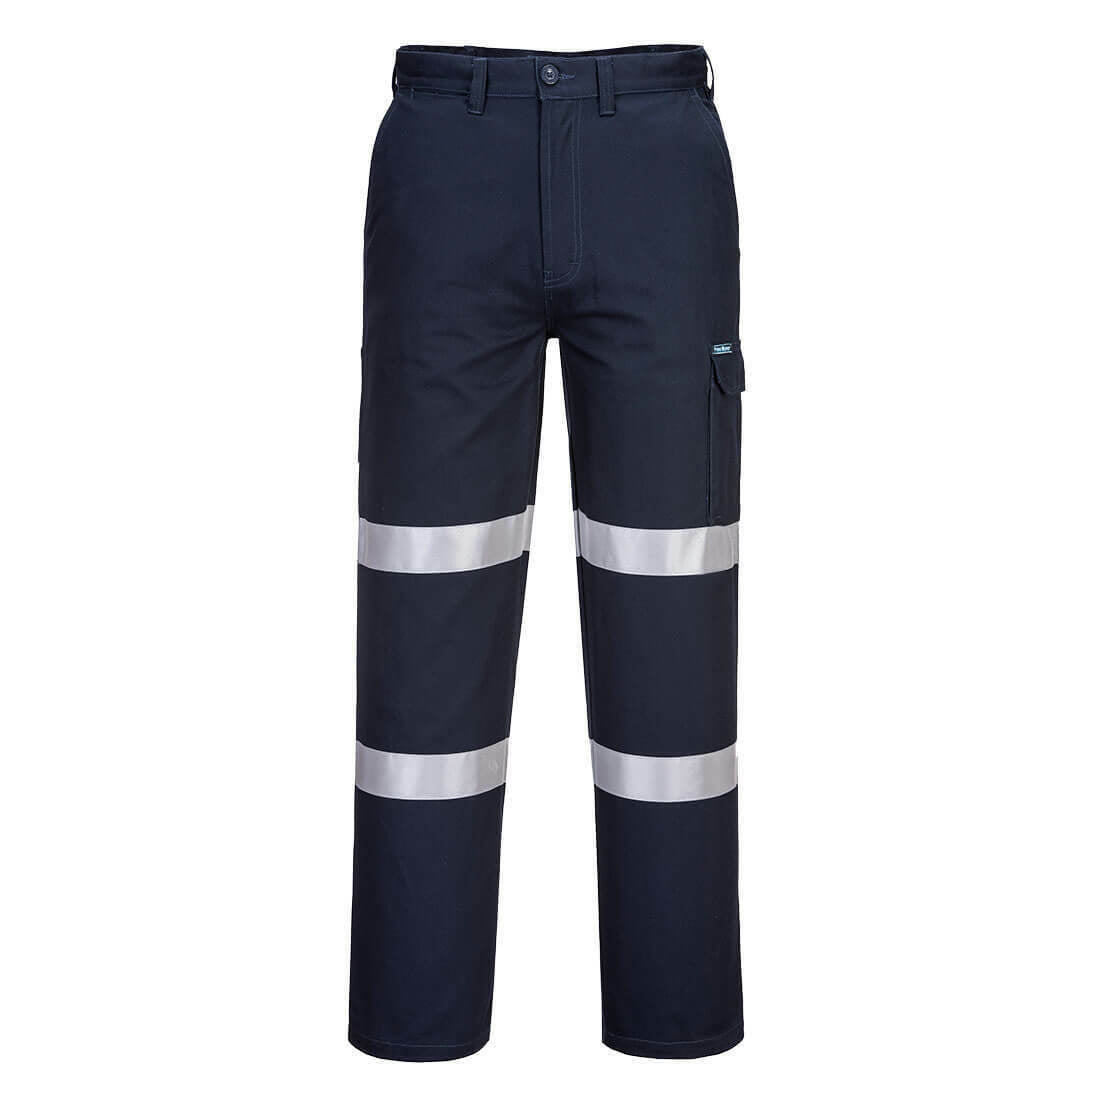 Portwest Mens Prime Mover Cargo Pants Double Tape Lumentex Work Safety MD701